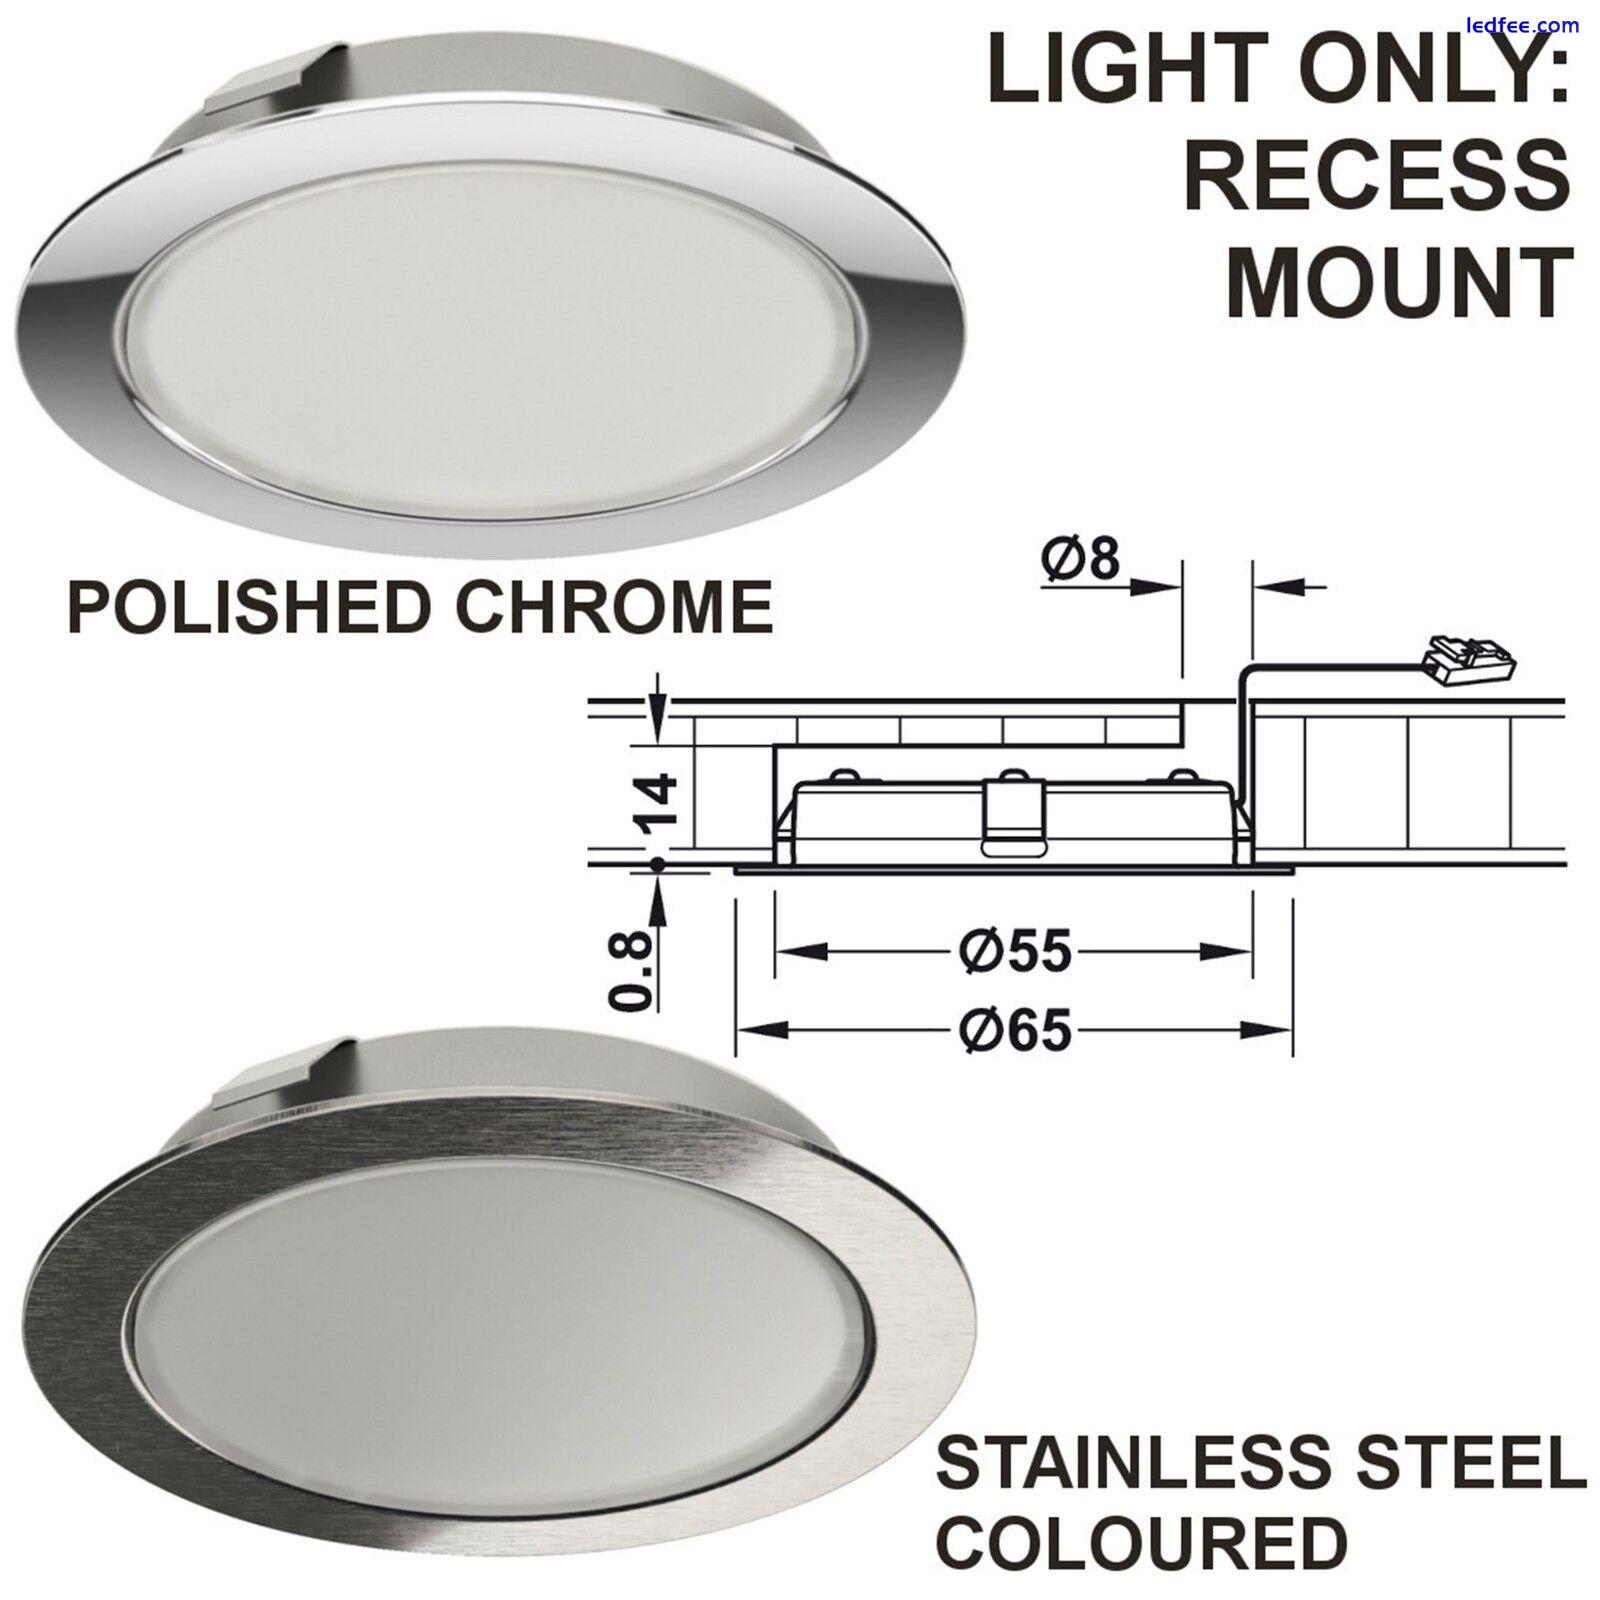 Hafele Loox LED 3038 Downlight 24V Ø 65mm, Recess / Surface Mounting, Rated IP20 3 